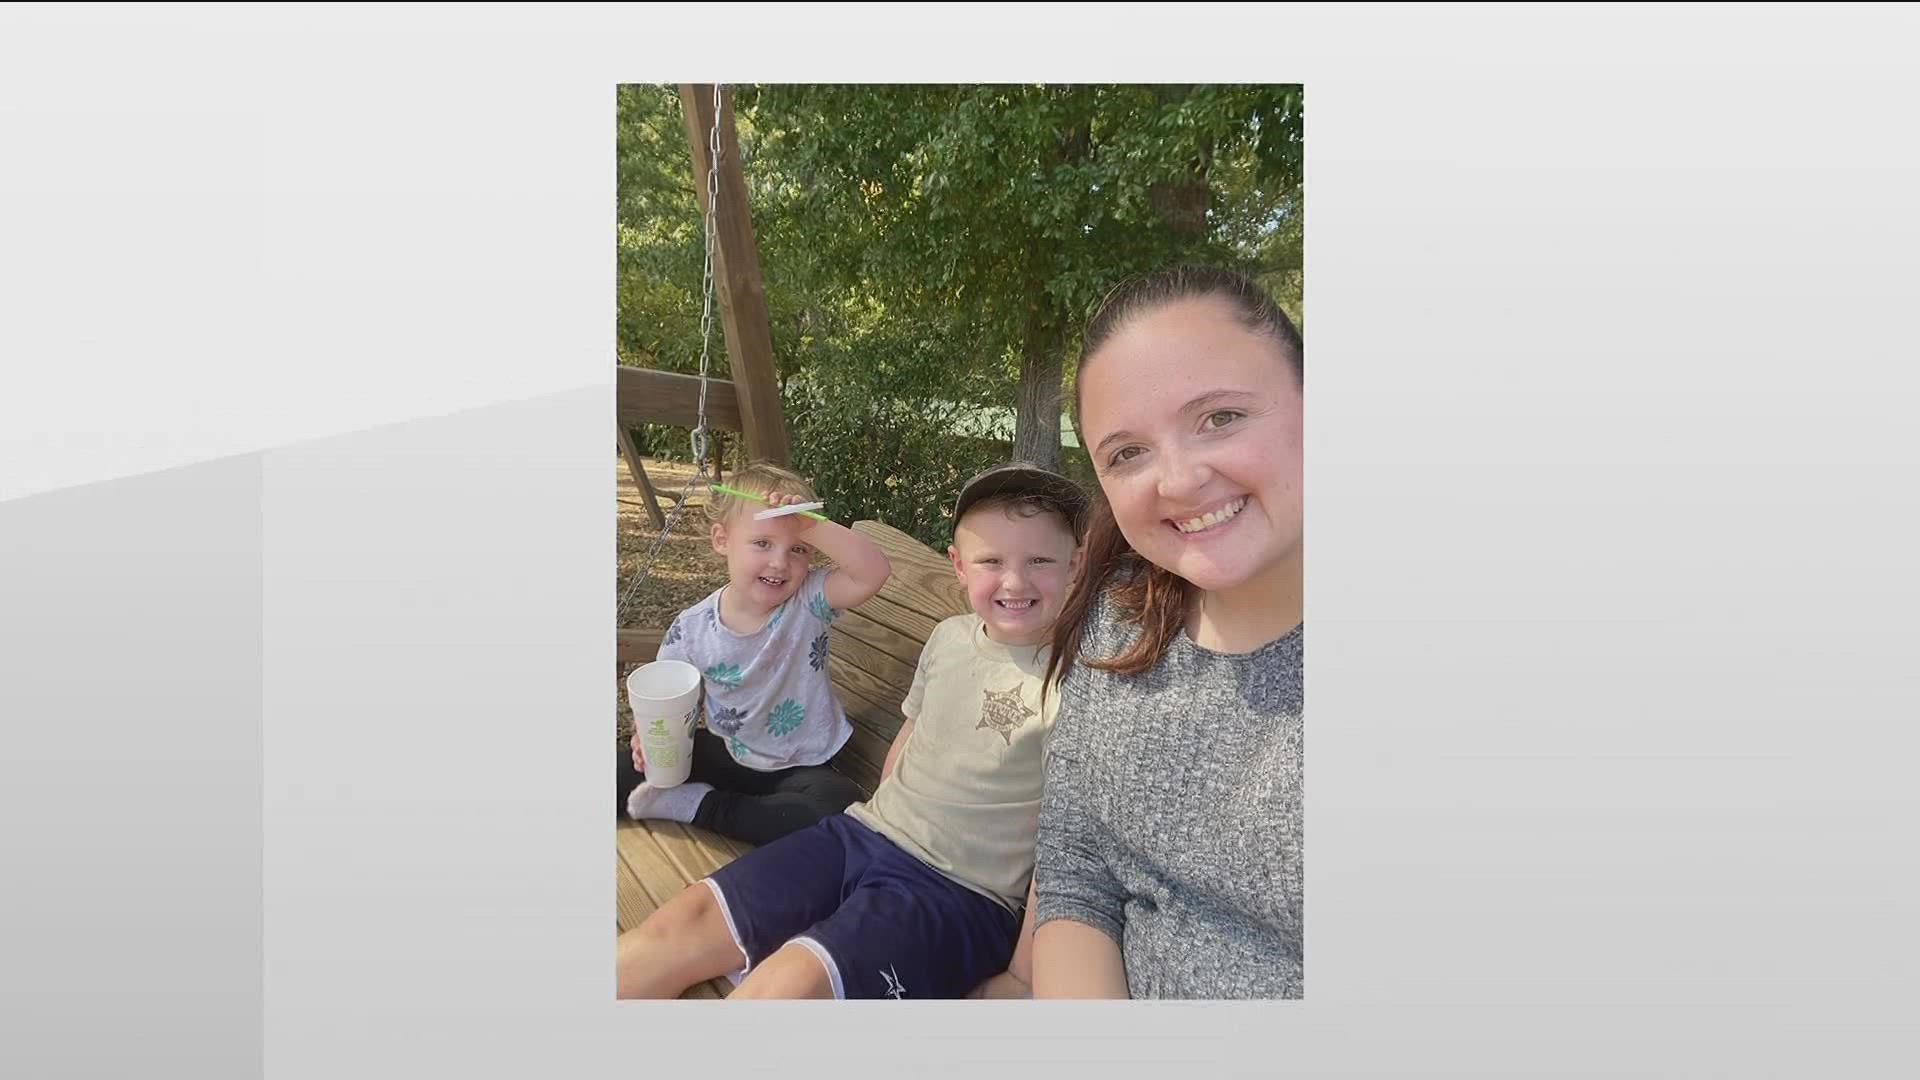 Authorities are searching for the driver of BMW SUV who fired multiple rounds into Georgia family's car. The mom is fighting for her life.